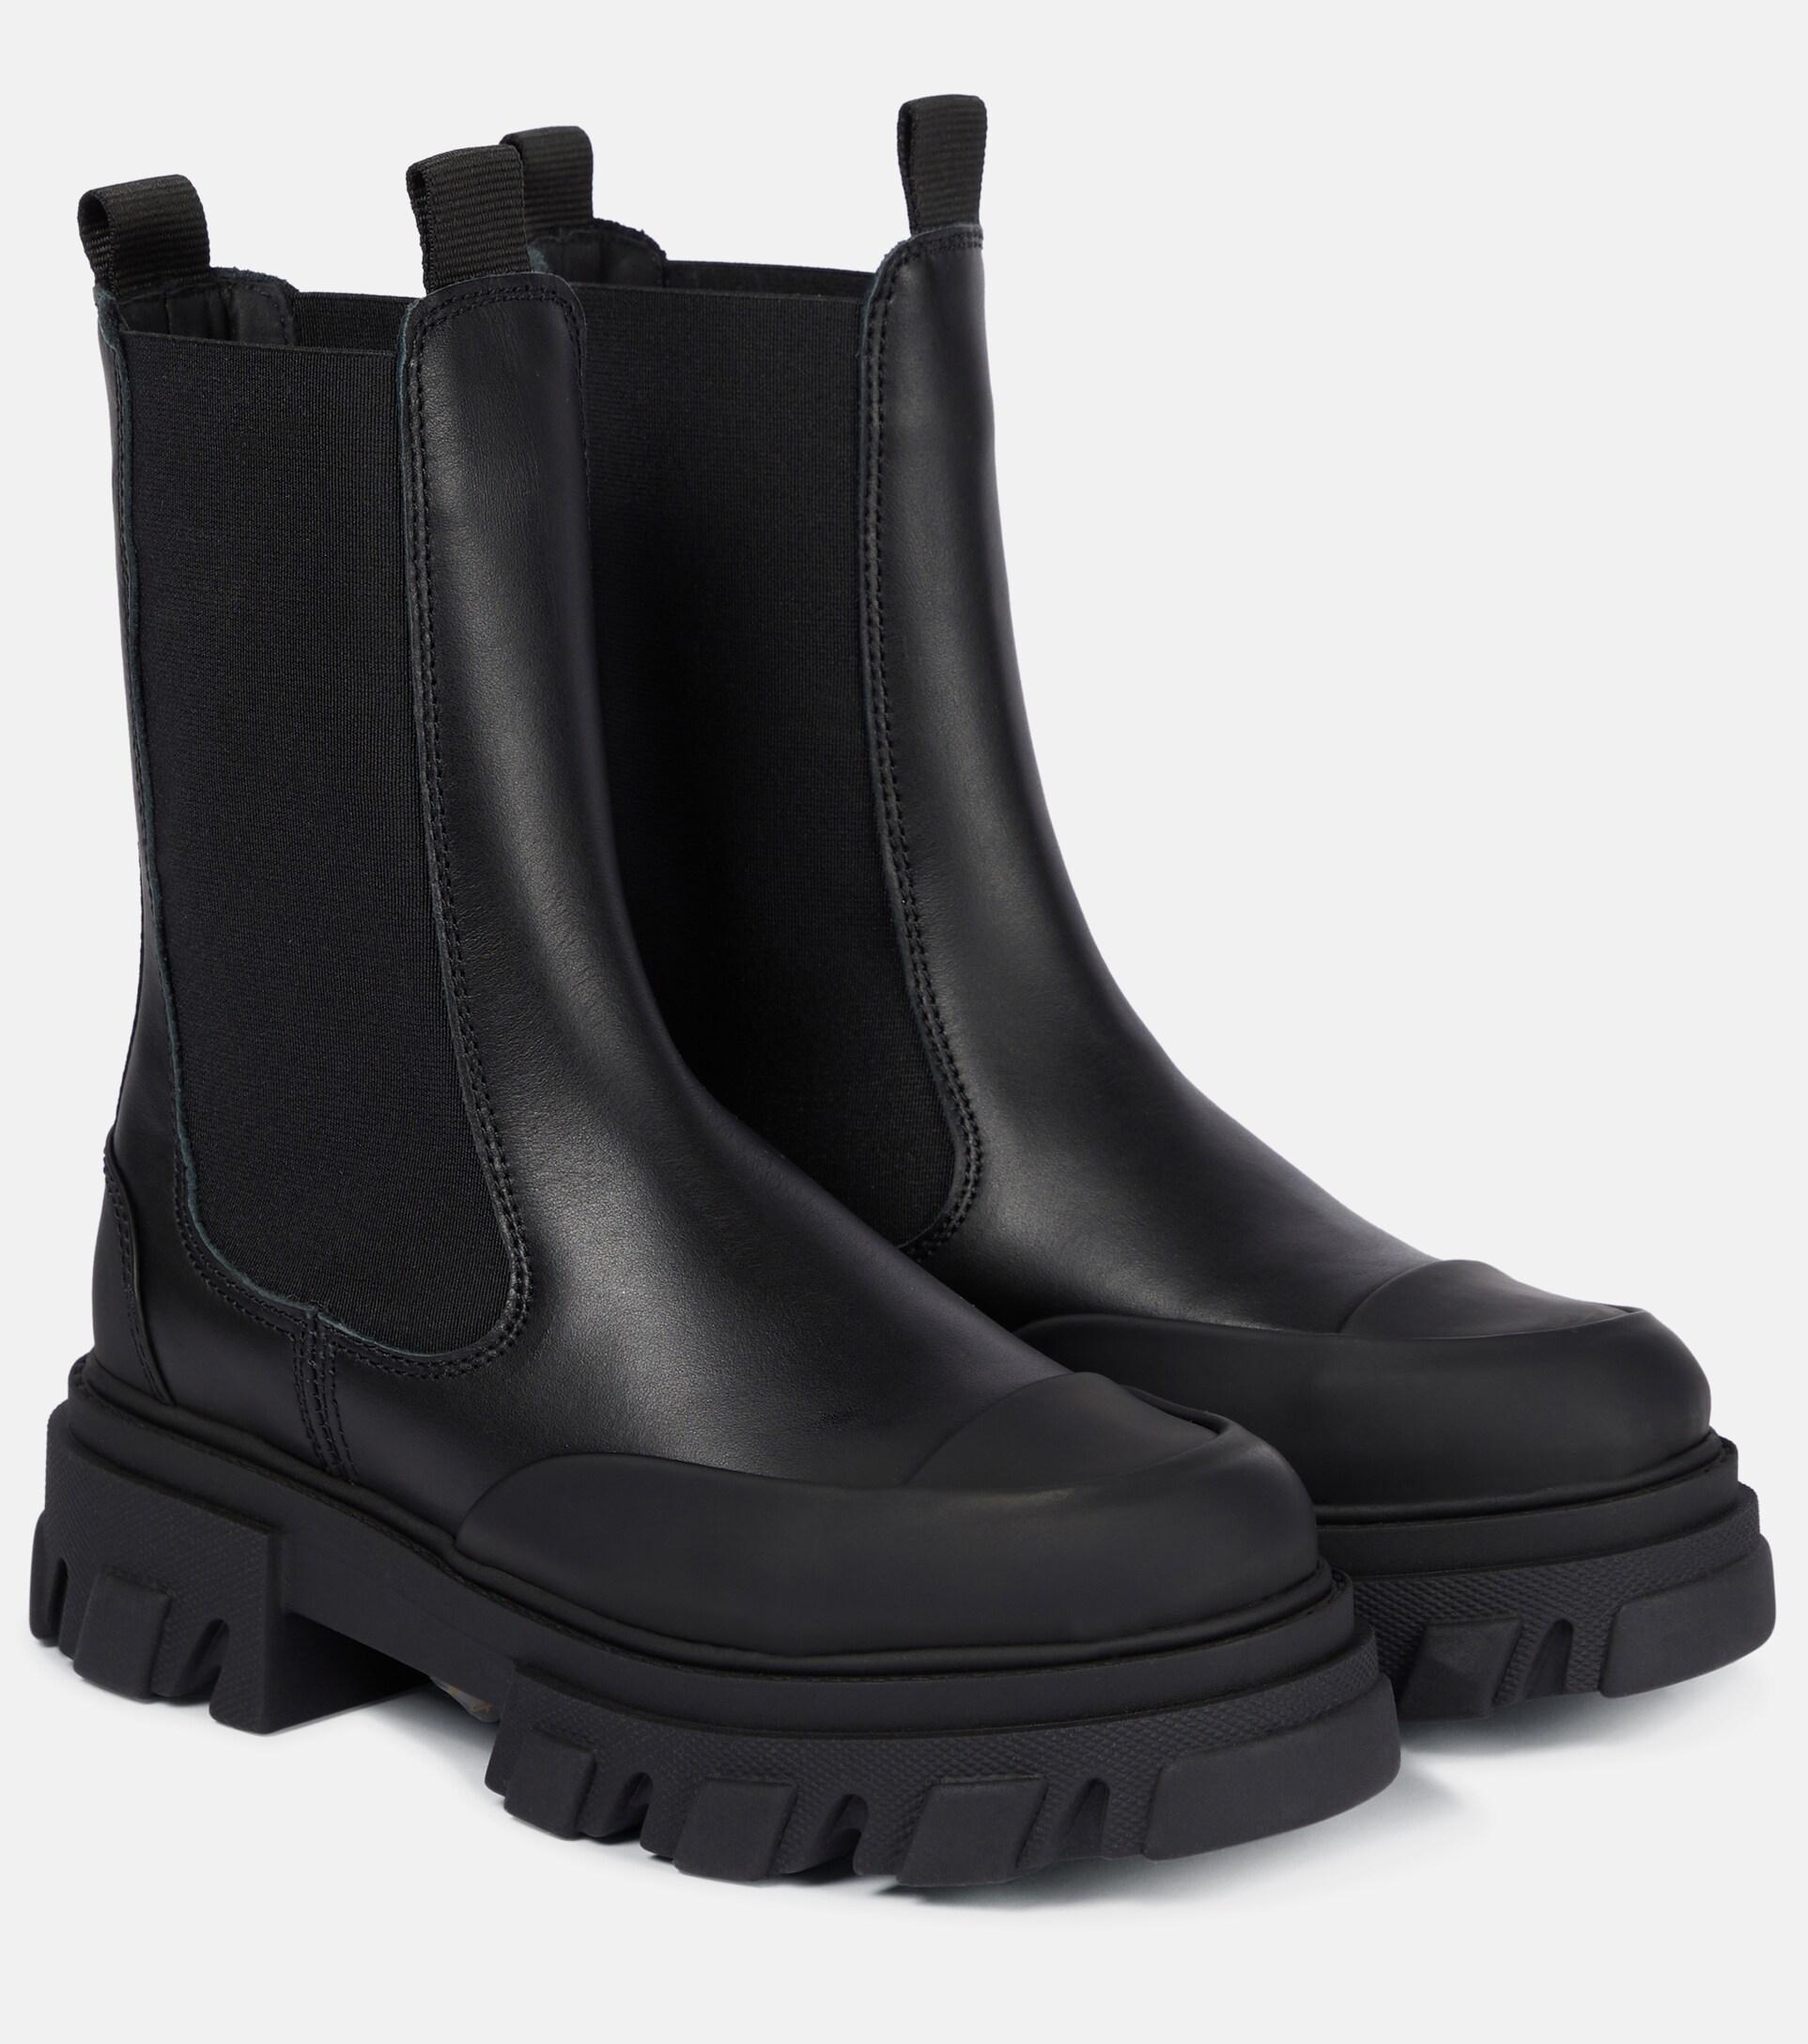 Ganni Leather Chelsea Boots in Black | Lyst